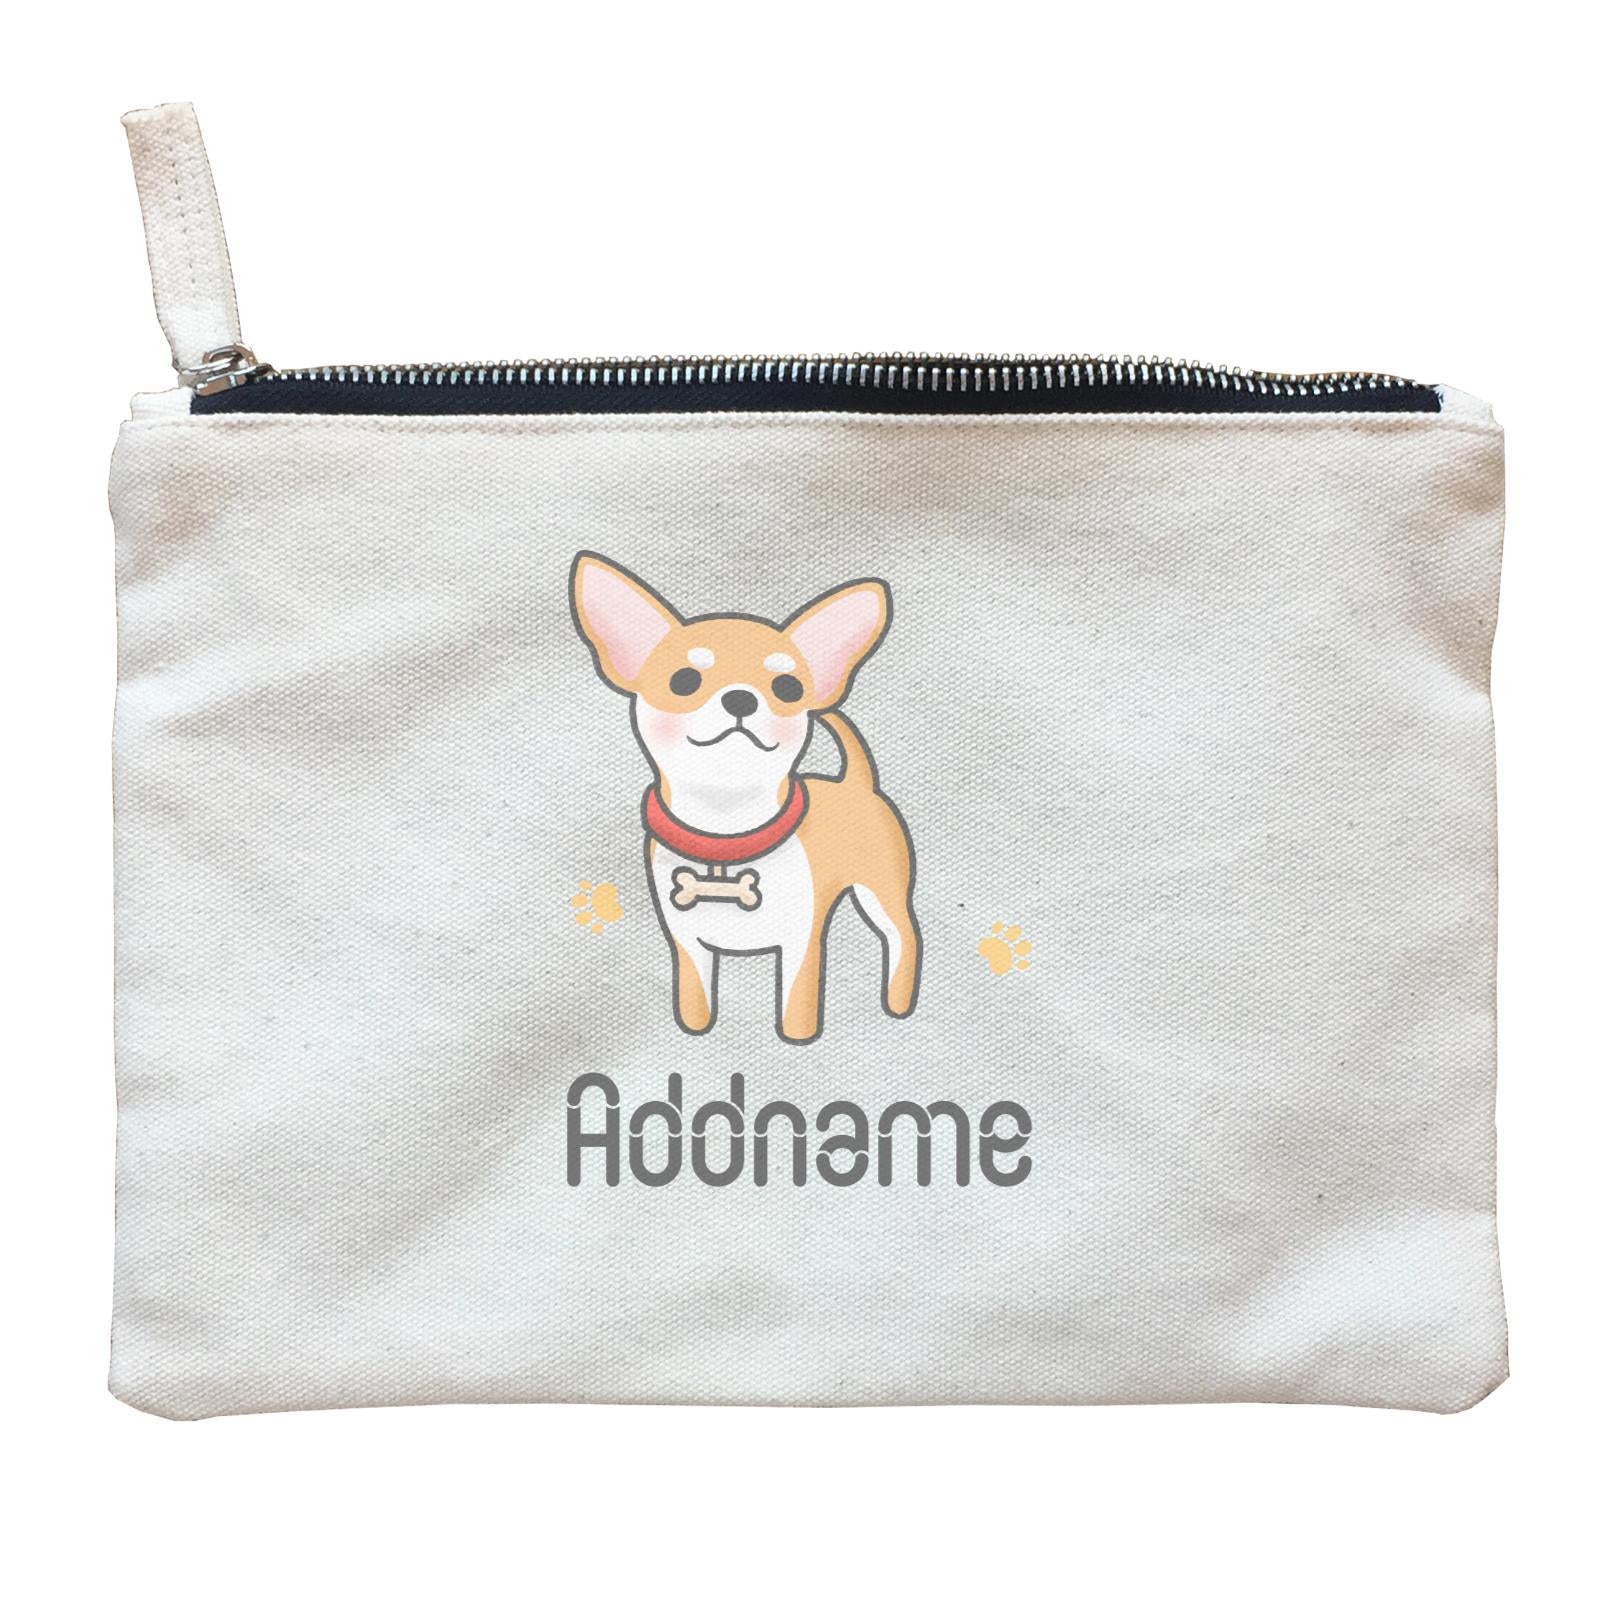 Cute Hand Drawn Style Chihuahua Addname Zipper Pouch